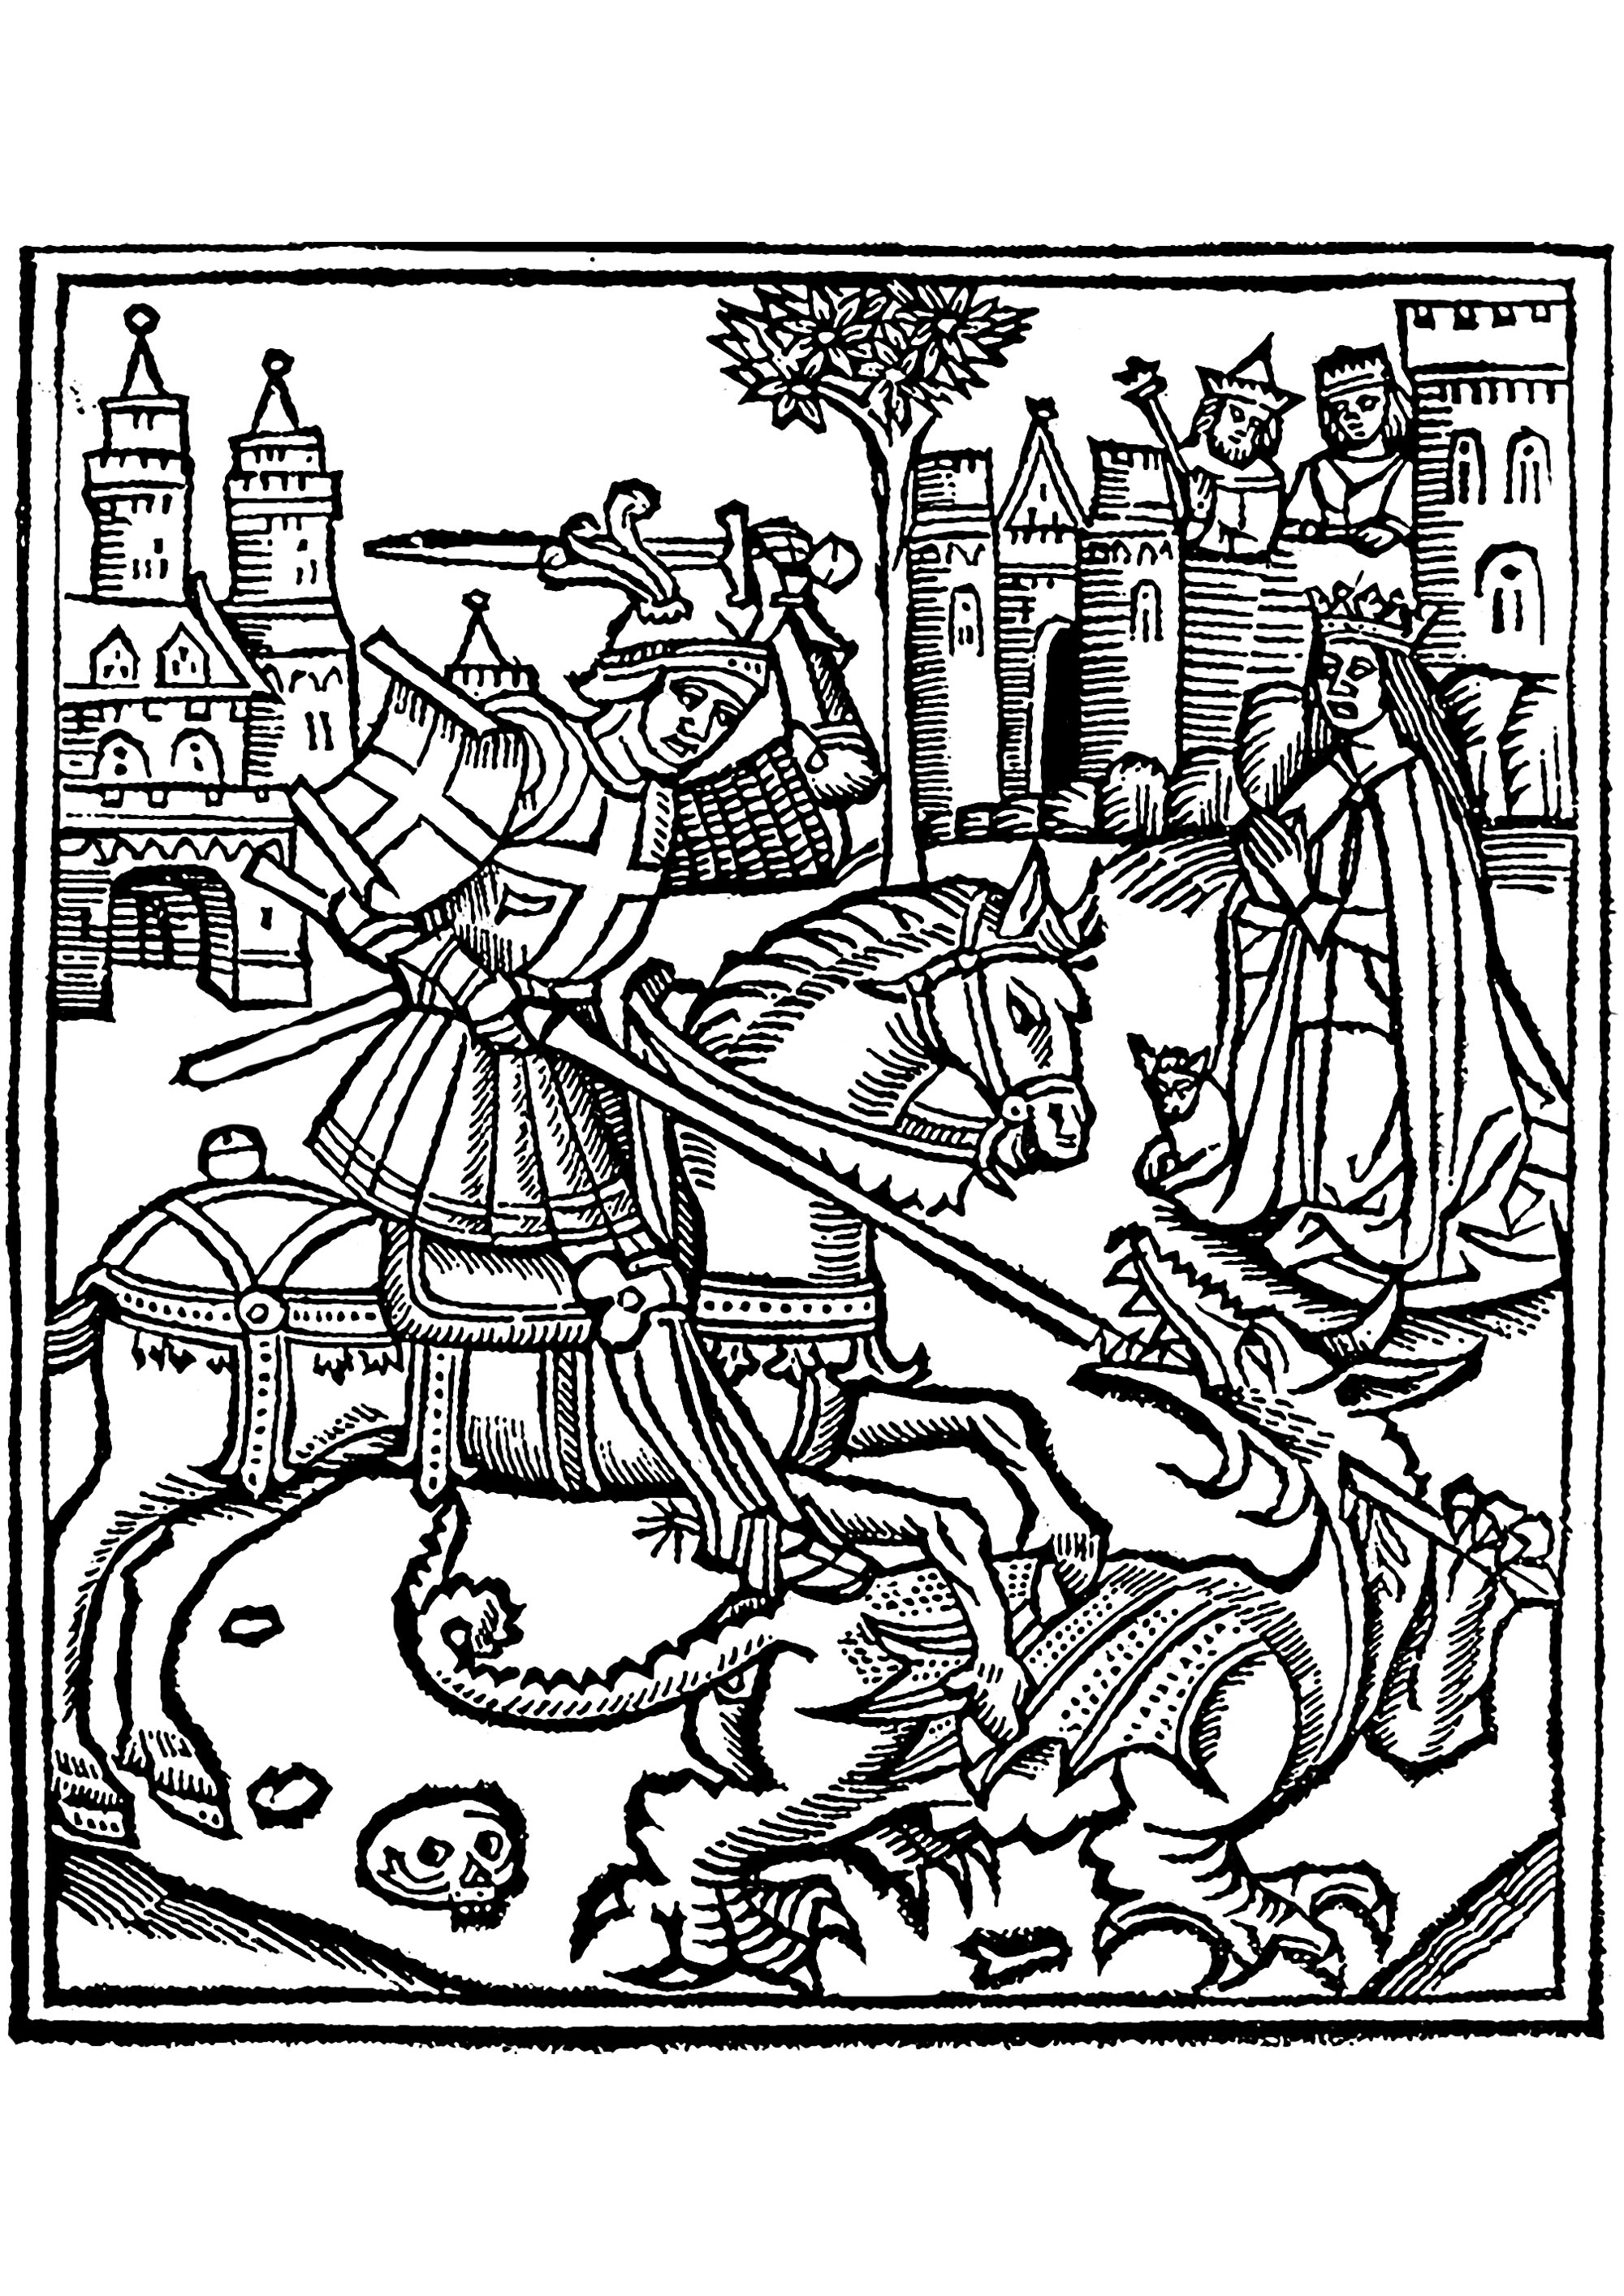 Coloring page created from a woodcut representing St George Slaying the Dragon, from the Life of Saint George (1515)